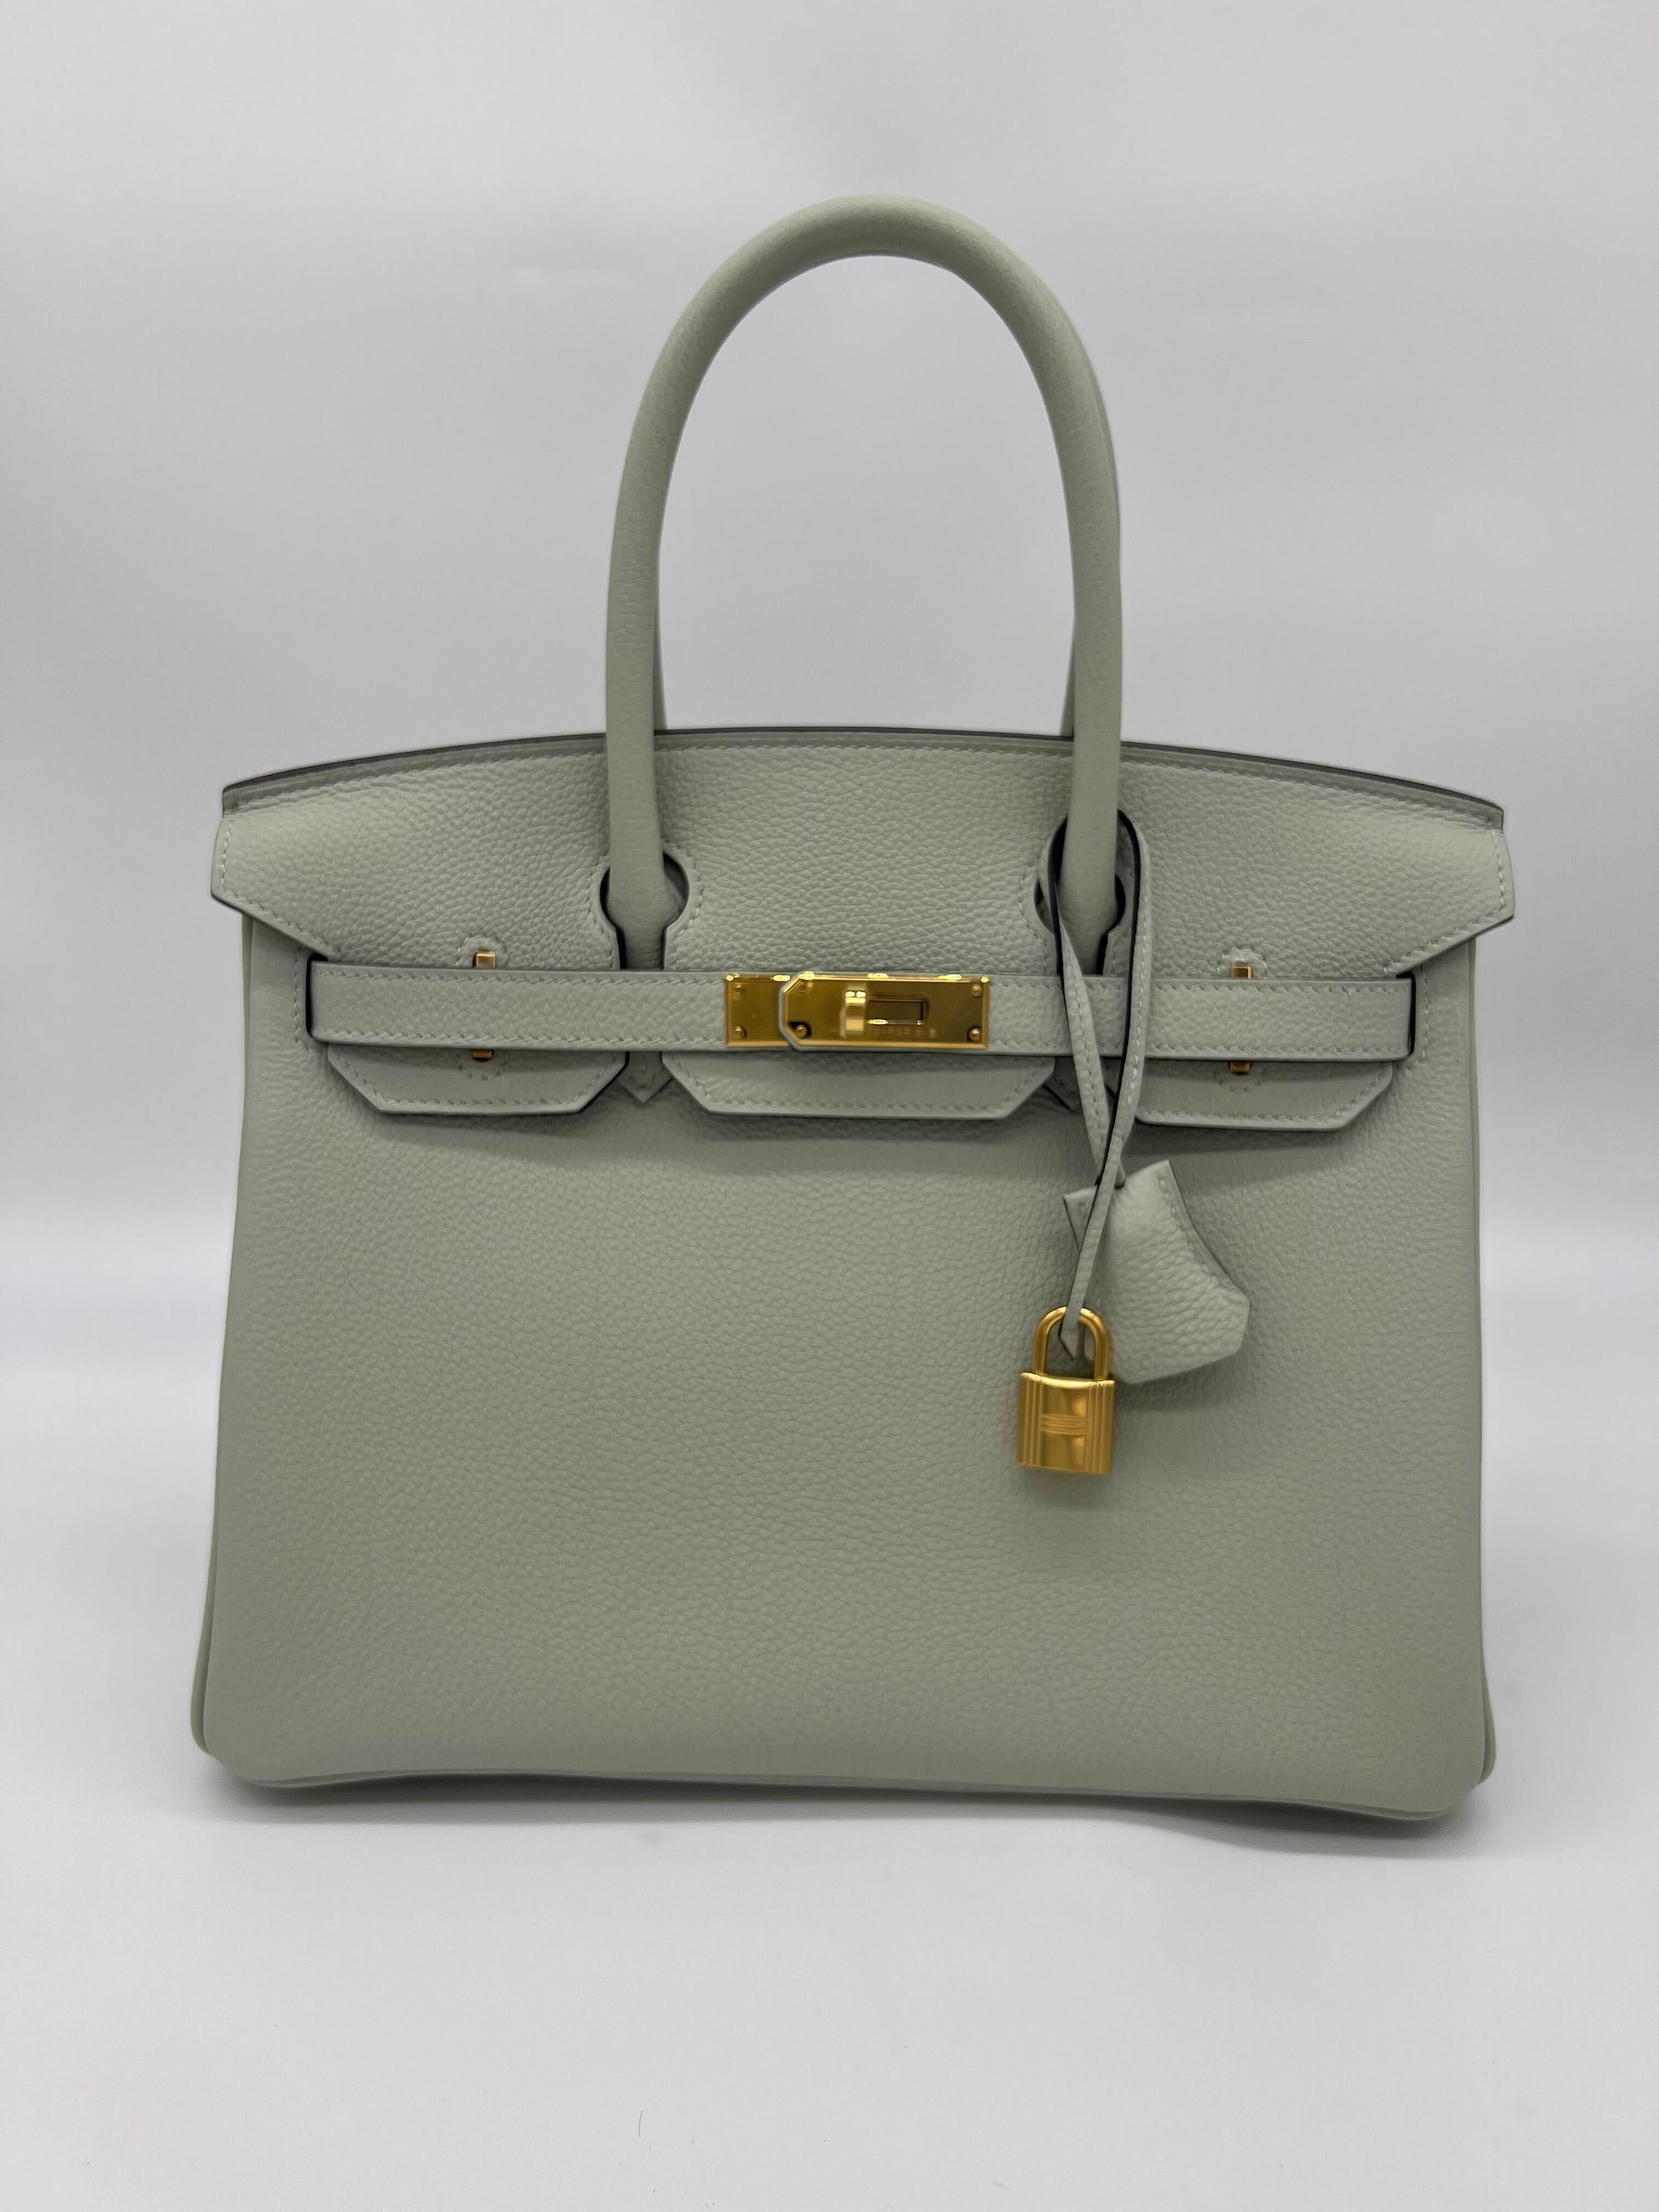 Hermes Birkin 30 Veau Togo Leather Gris Neve Gold Hardware

Condition: New
Material: Togo Leather
Measurements: 30cm x 23.5cm x 16cm
Hardware: Gold Hardware

*Comes with full original packaging.
*Full plastic on hardware.